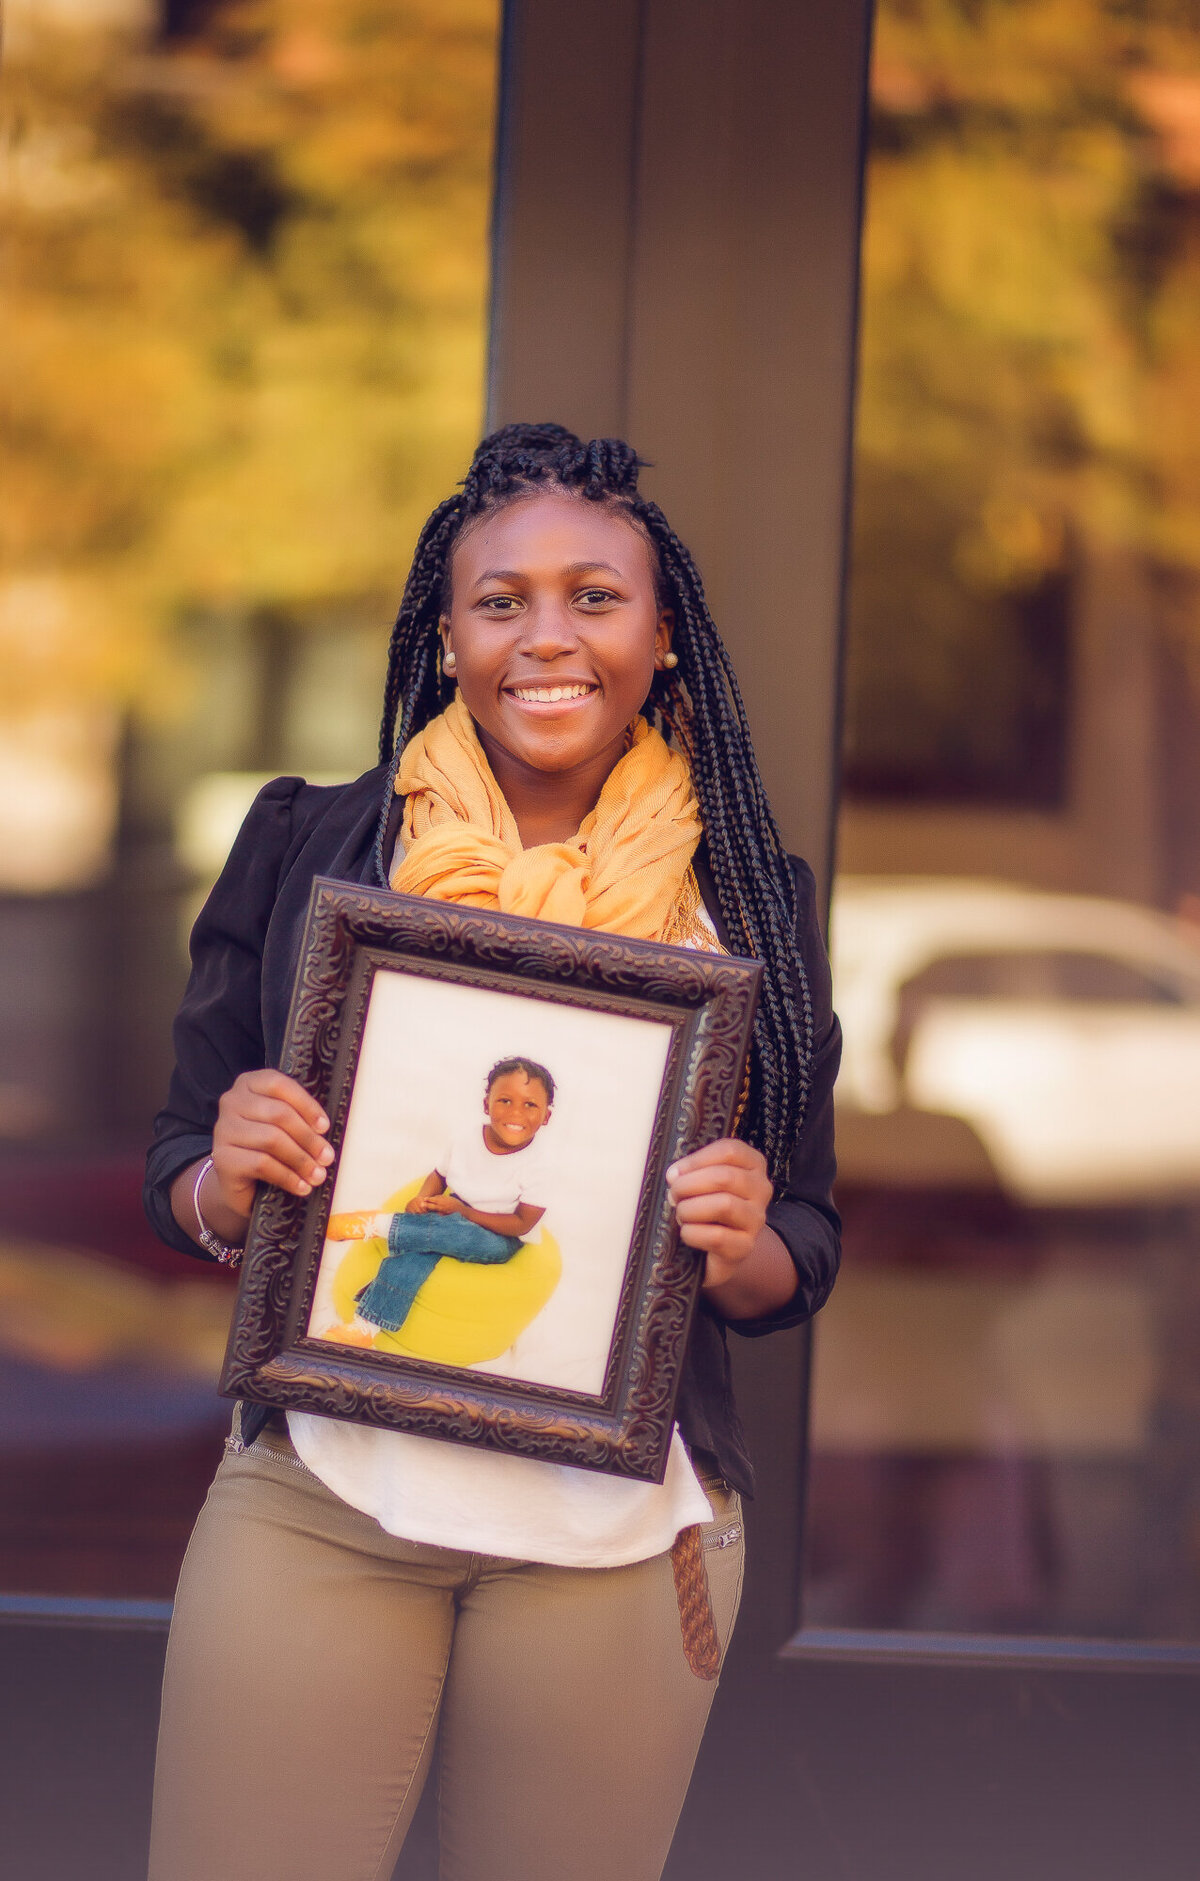 Color image of girl holding an image of herself